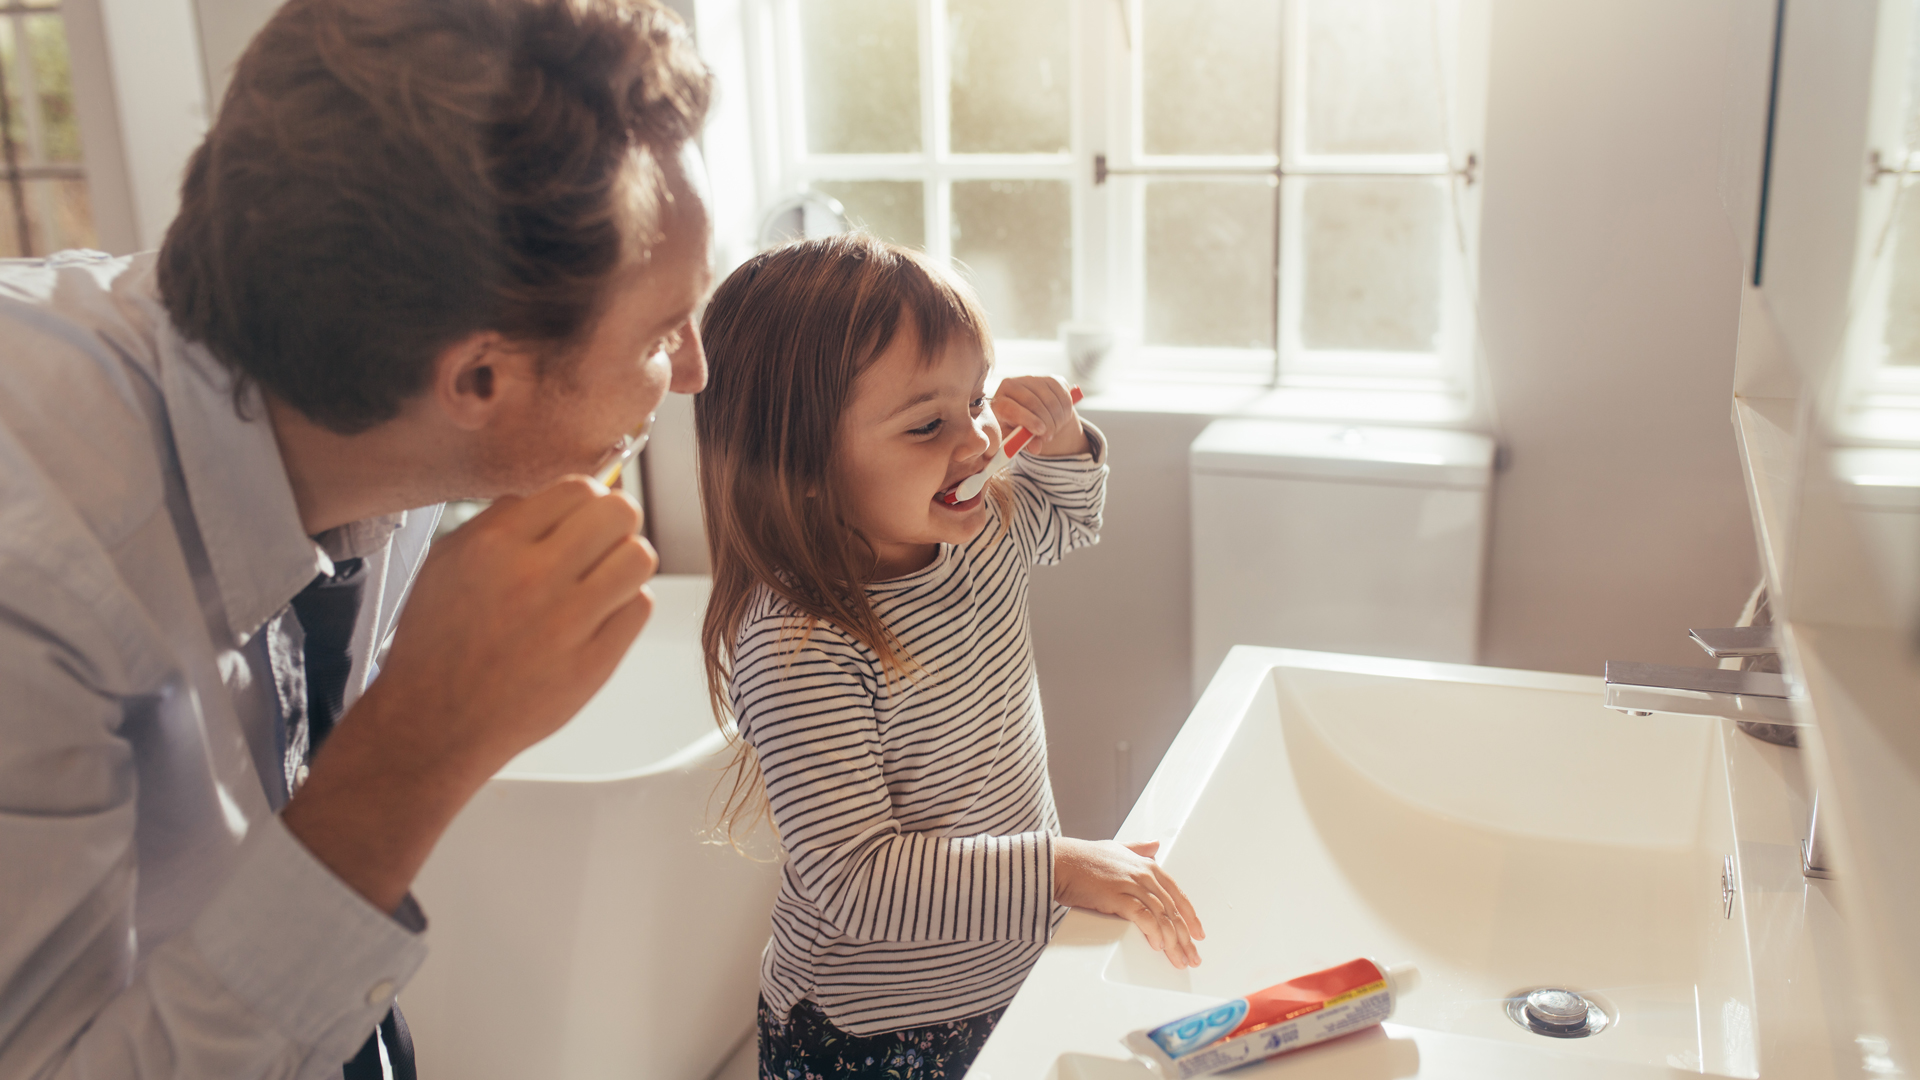 A Guide to Dental Health for Babies and Children